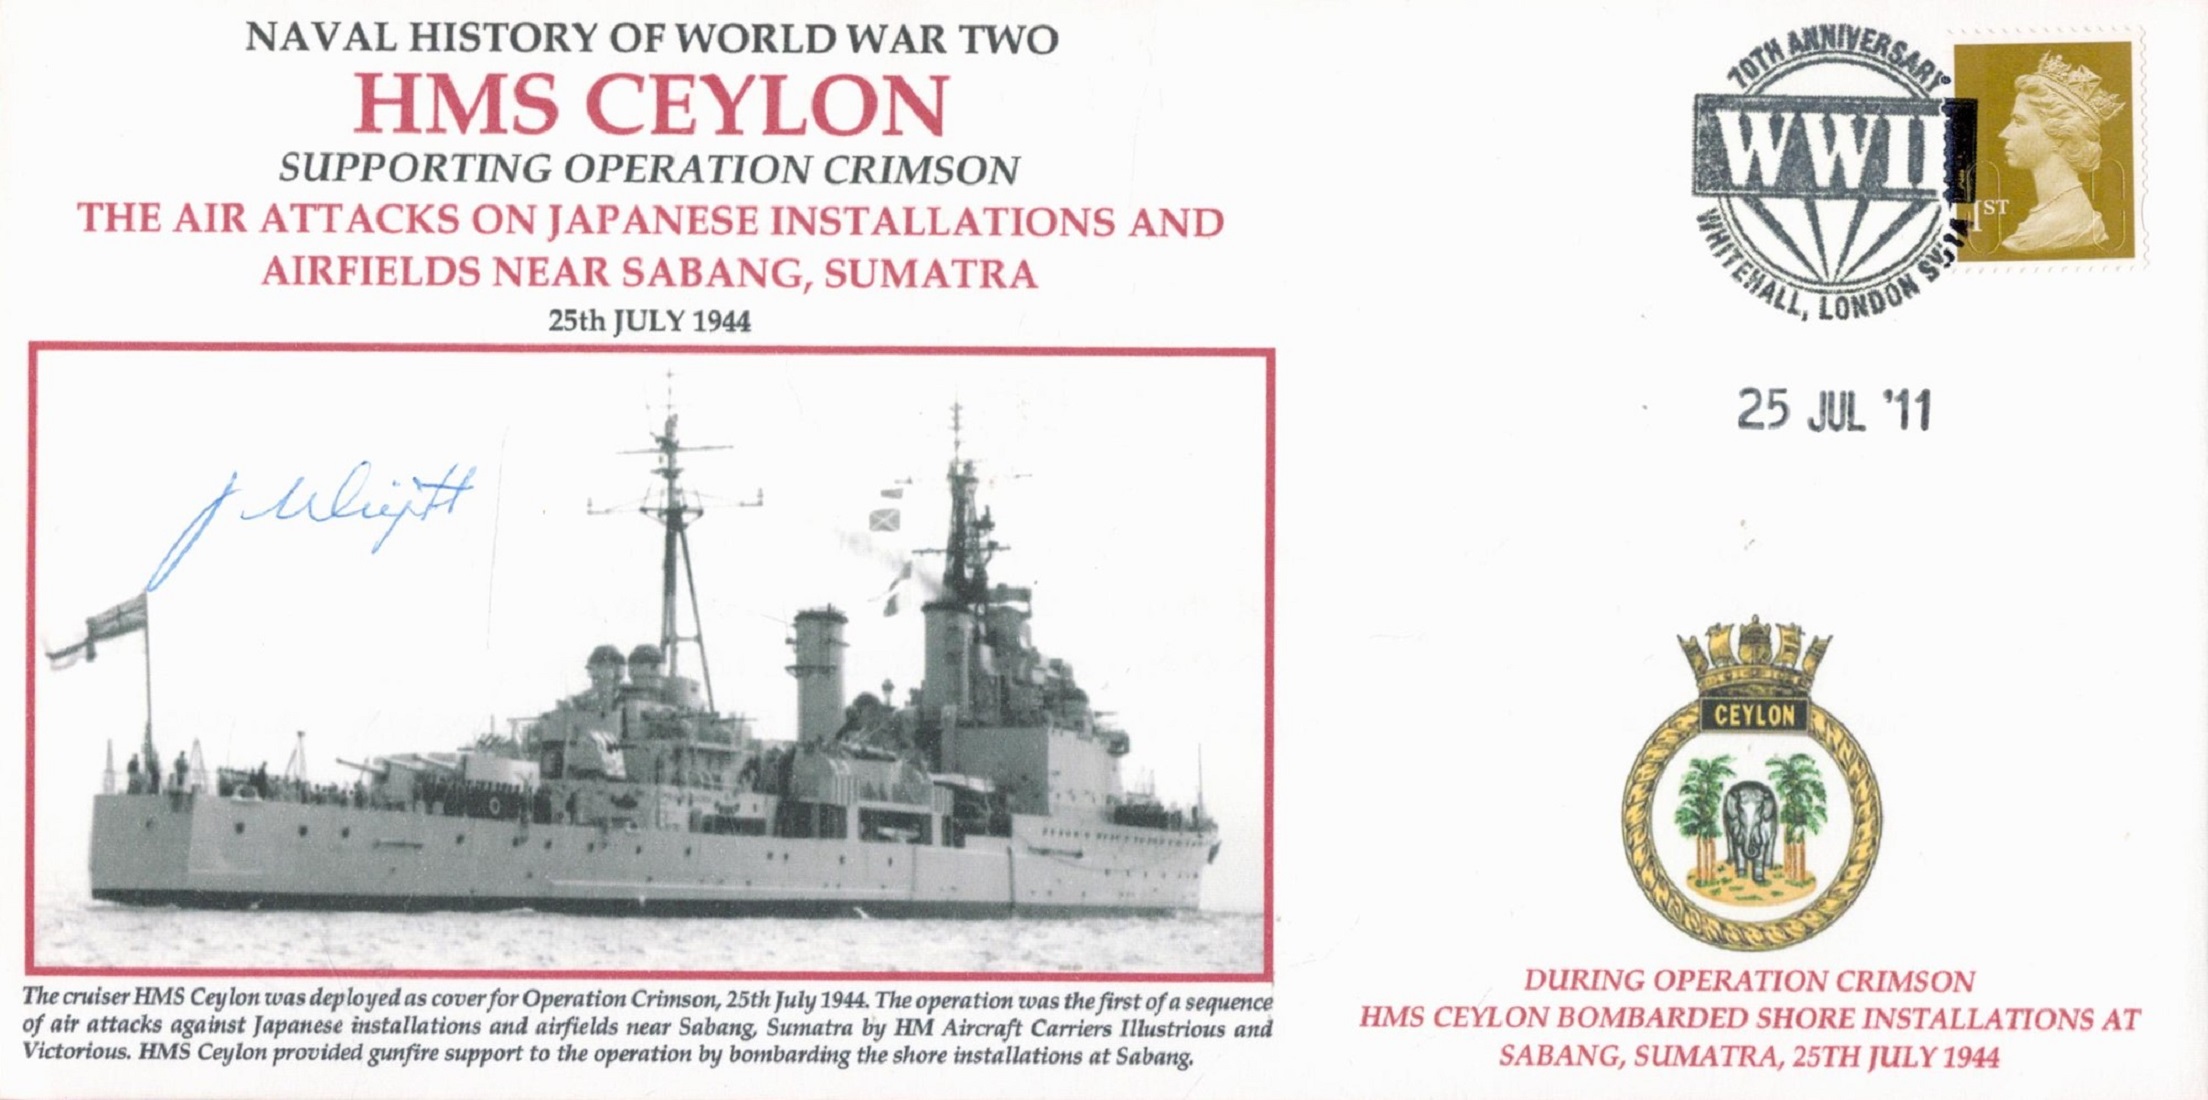 Naval History of World War two ‘HMS Ceylon’ Supporting Operation Crimson, the air attacks on